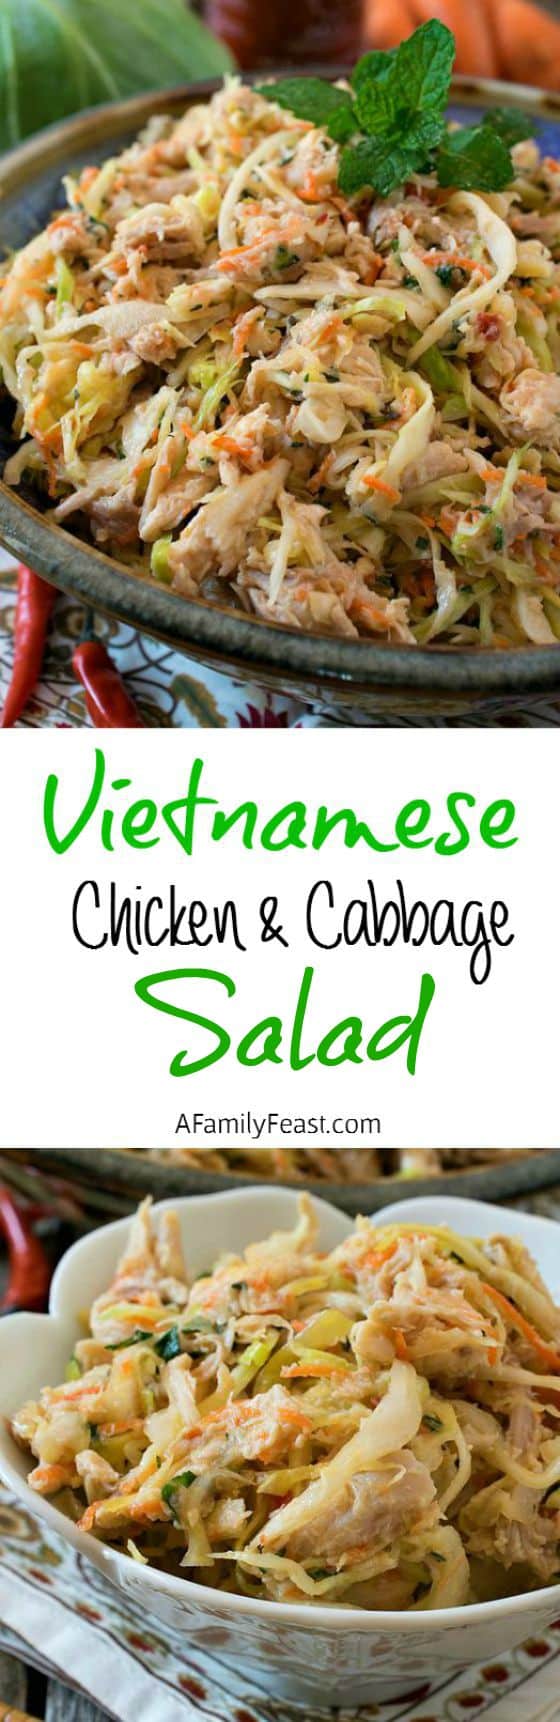 Vietnamese Chicken and Cabbage Salad - A super simple, super flavorful salad that is delicious as a main dish or side!